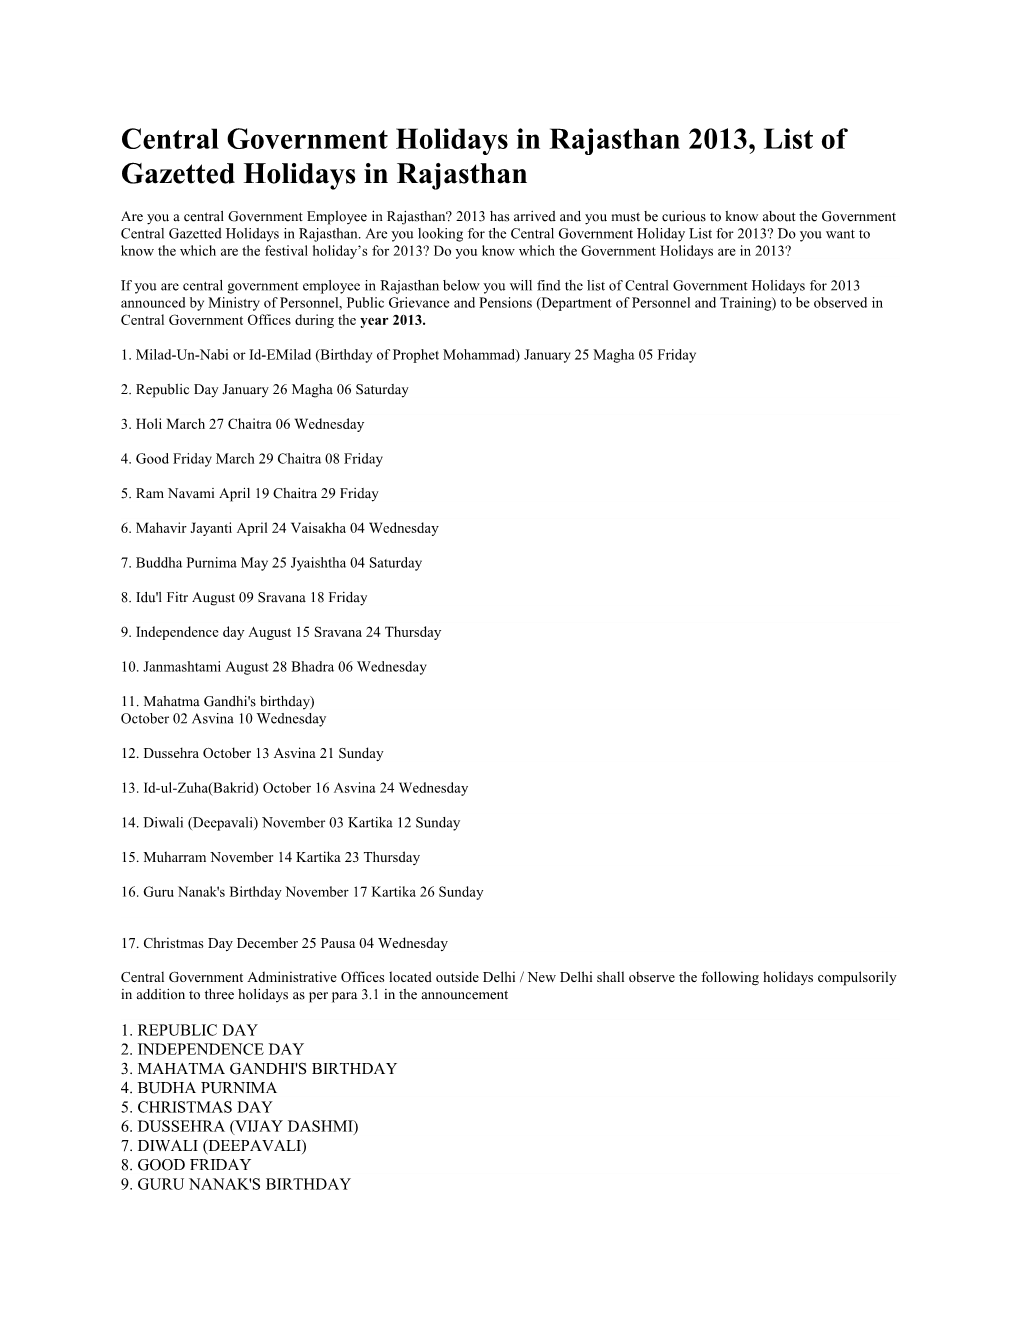 Central Government Holidays Inrajasthan2013, List of Gazetted Holidays in Rajasthan